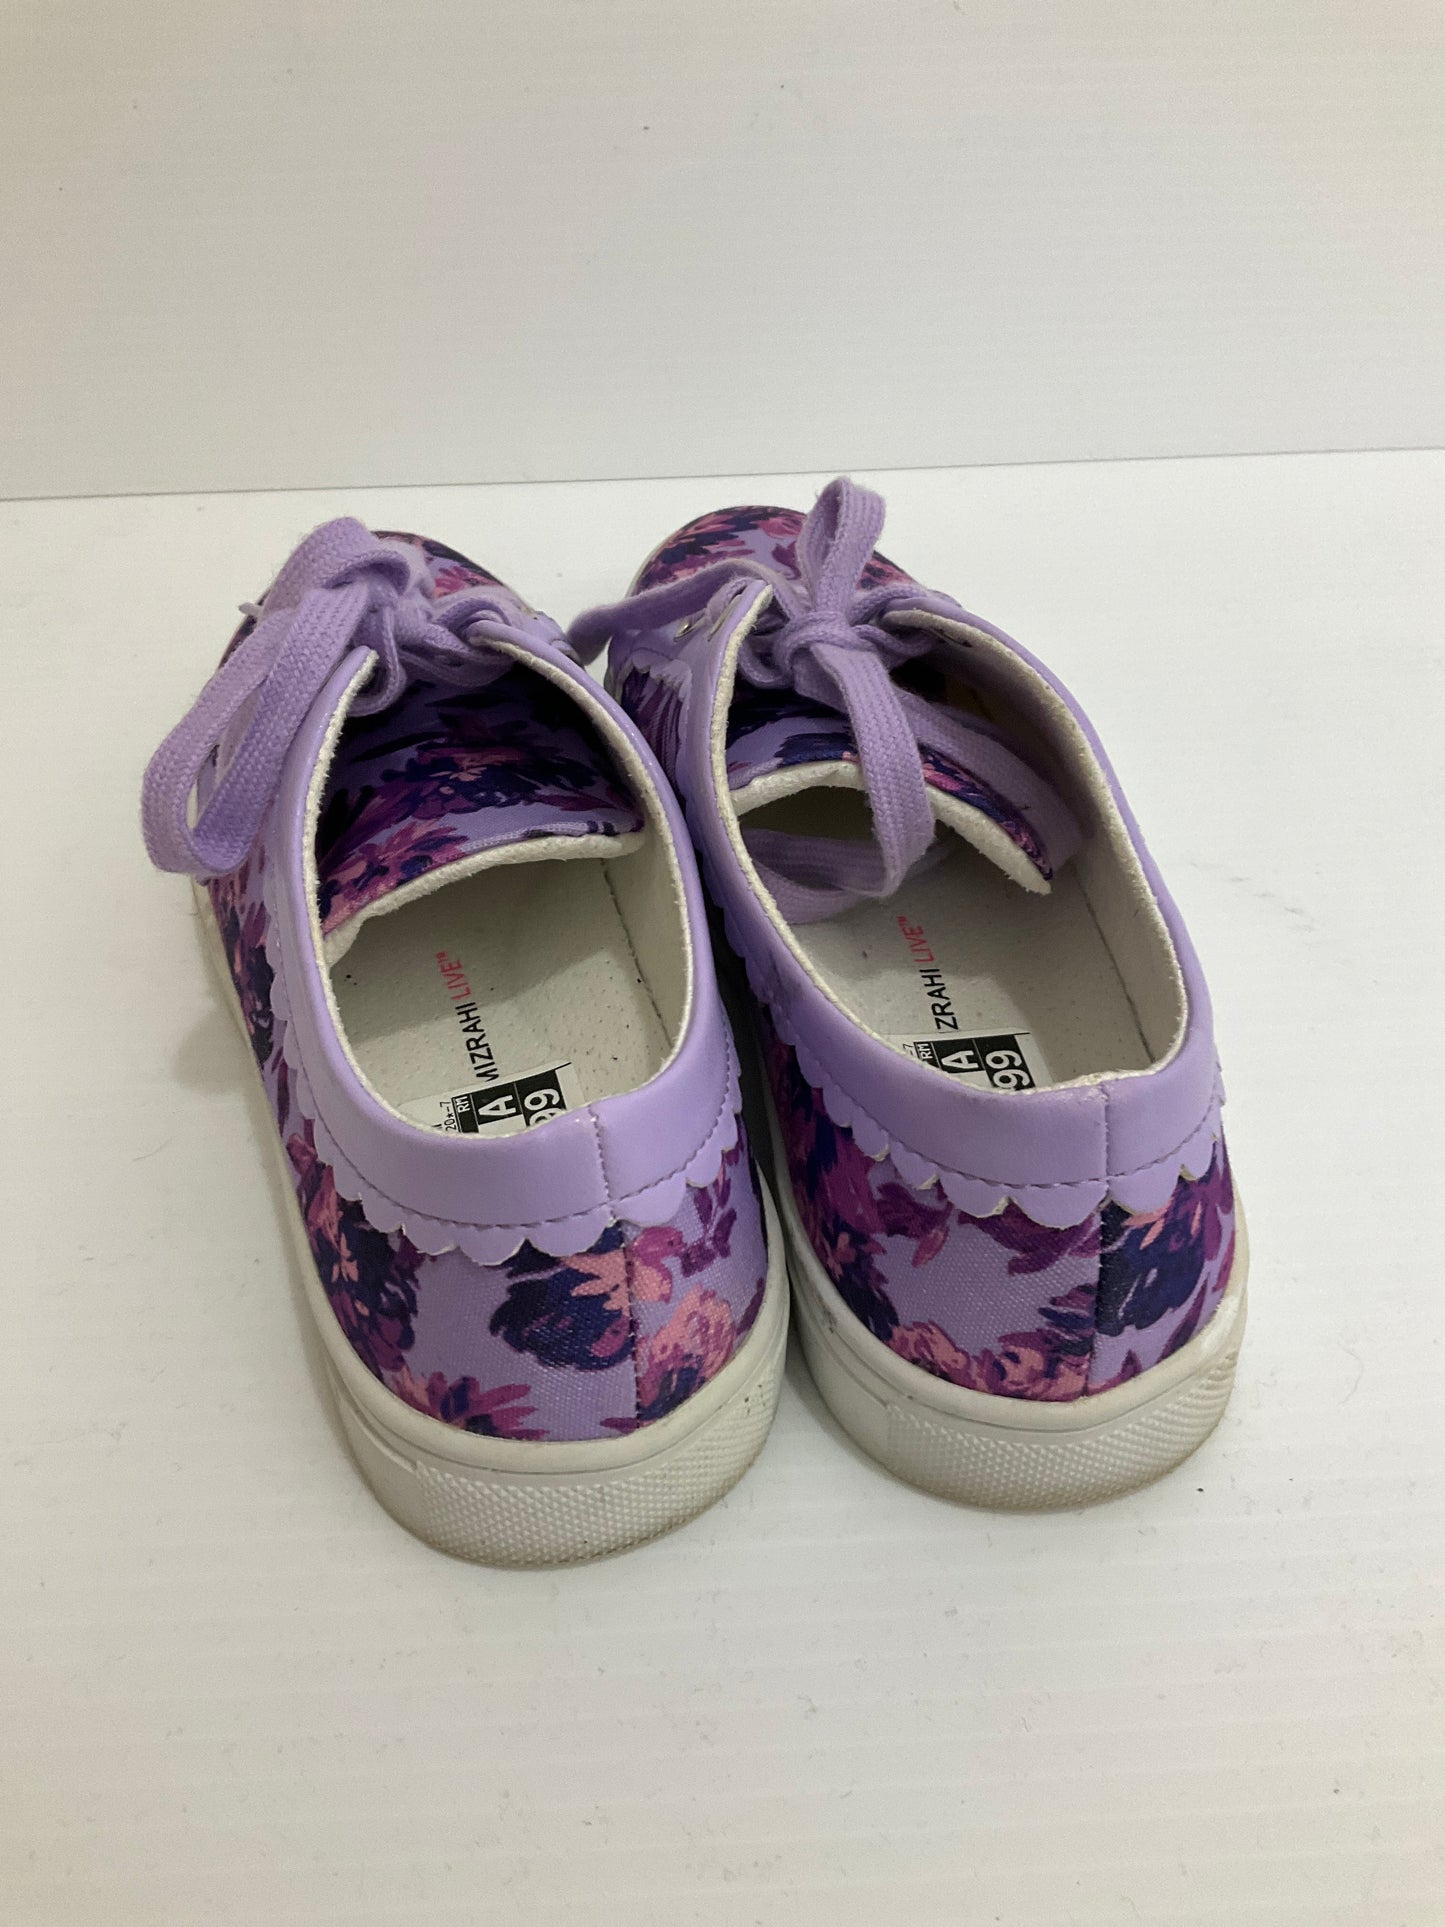 Shoes Sneakers By Isaac Mizrahi Live Qvc  Size: 7